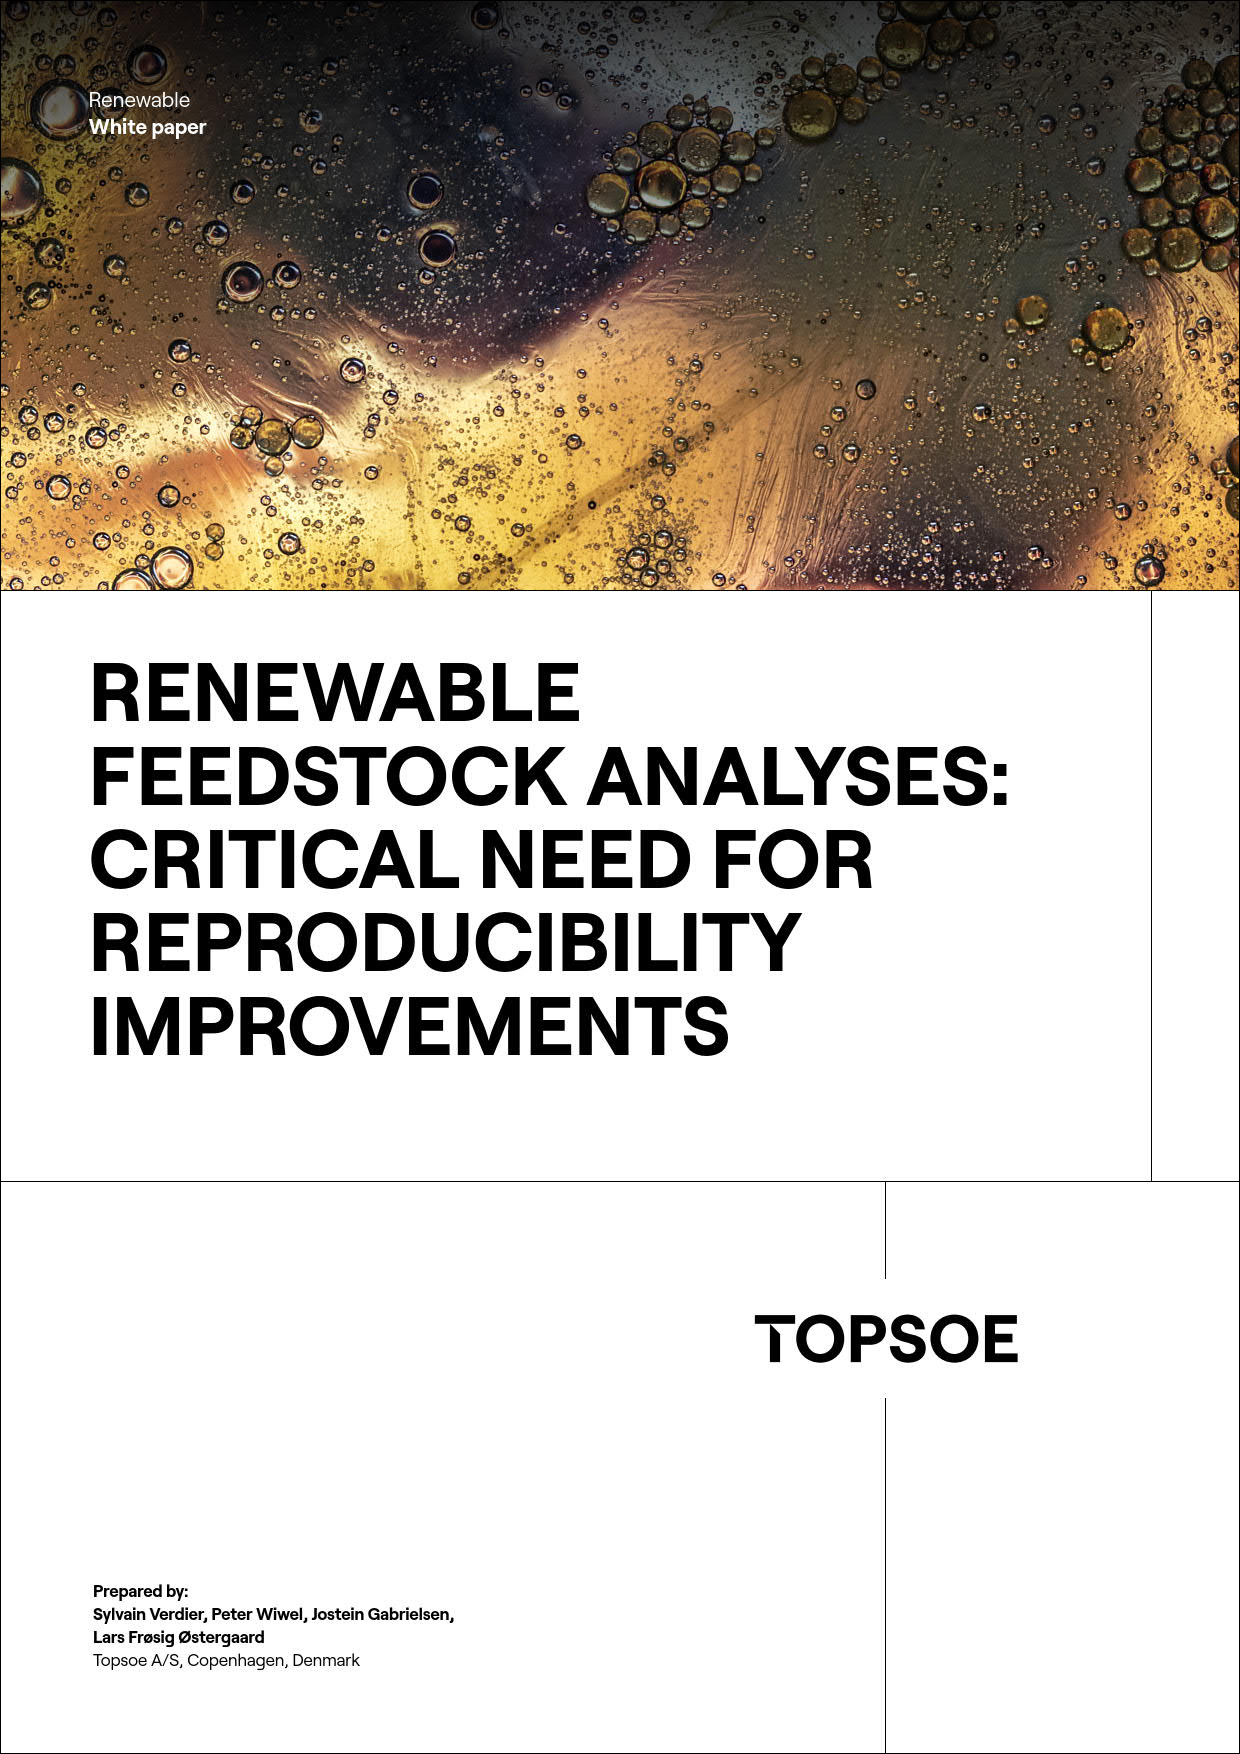 Renewable feedstock analyses: Critical need for reproducibility improvements